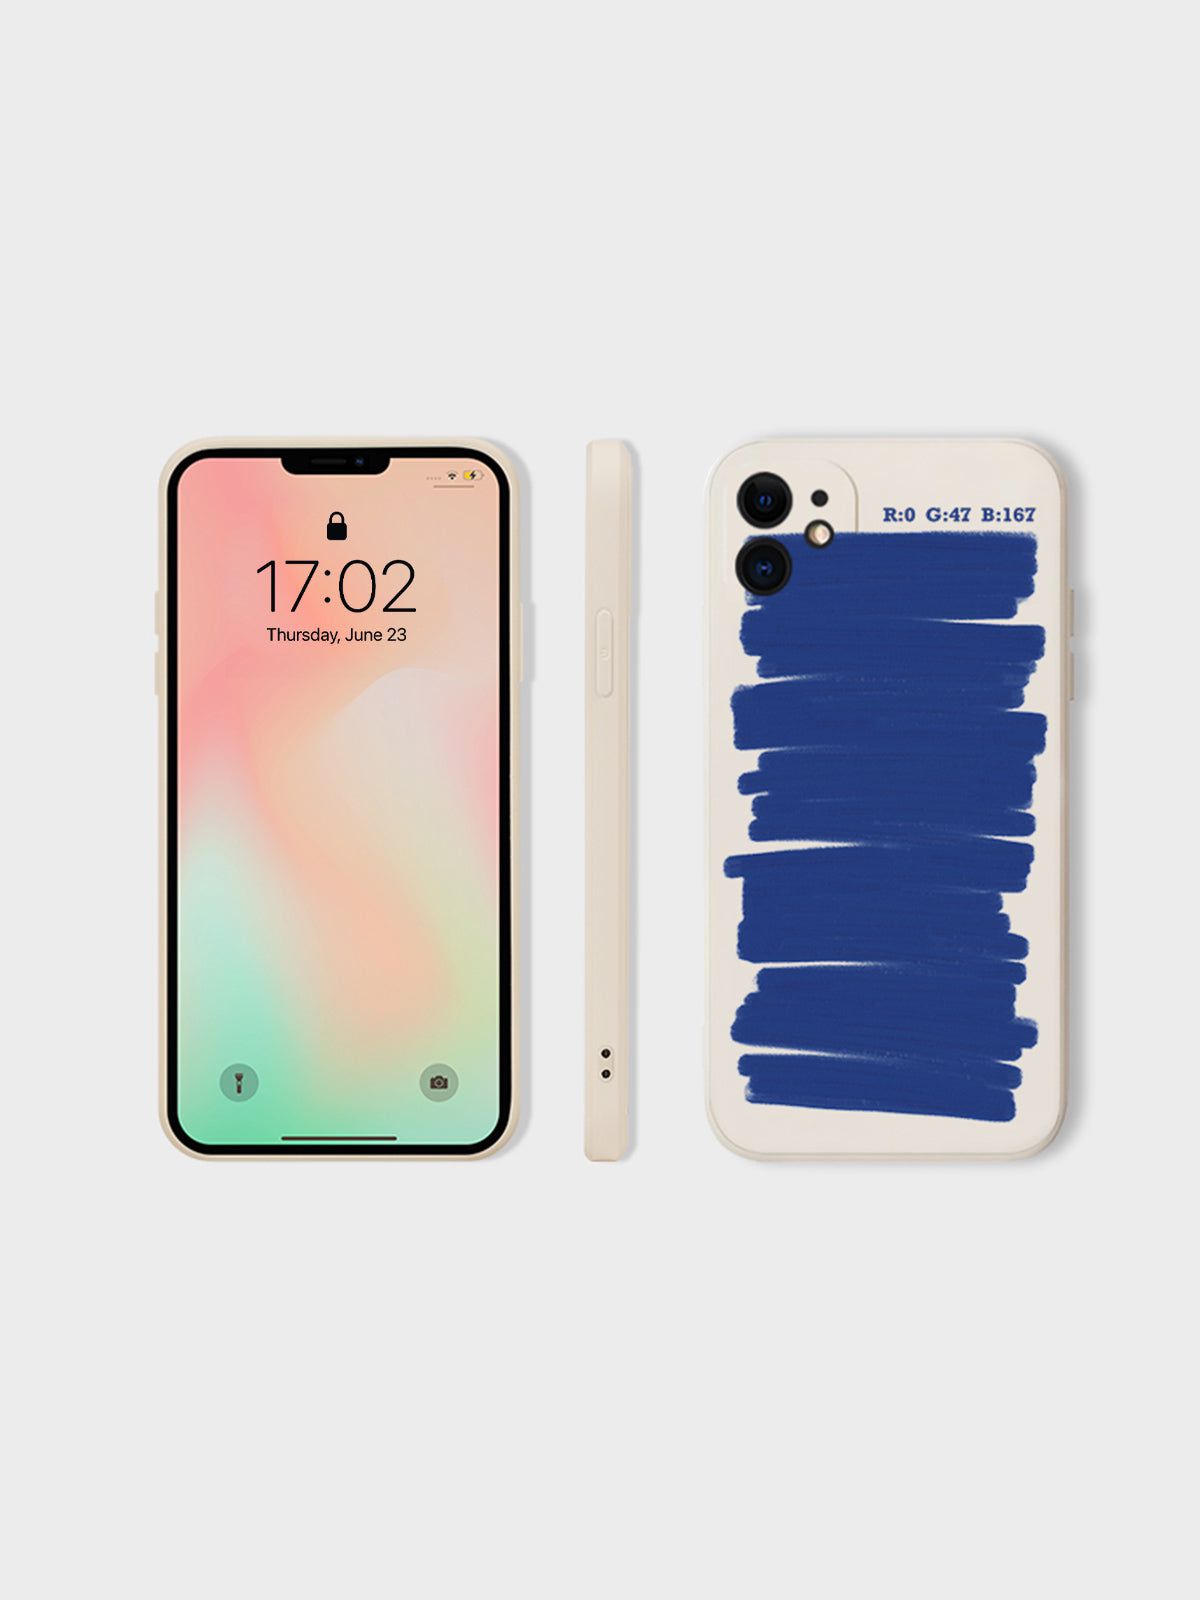 "Klein Blue" Mobile Phone Case for Iphone Streetwear Brand Techwear Combat Tactical YUGEN THEORY